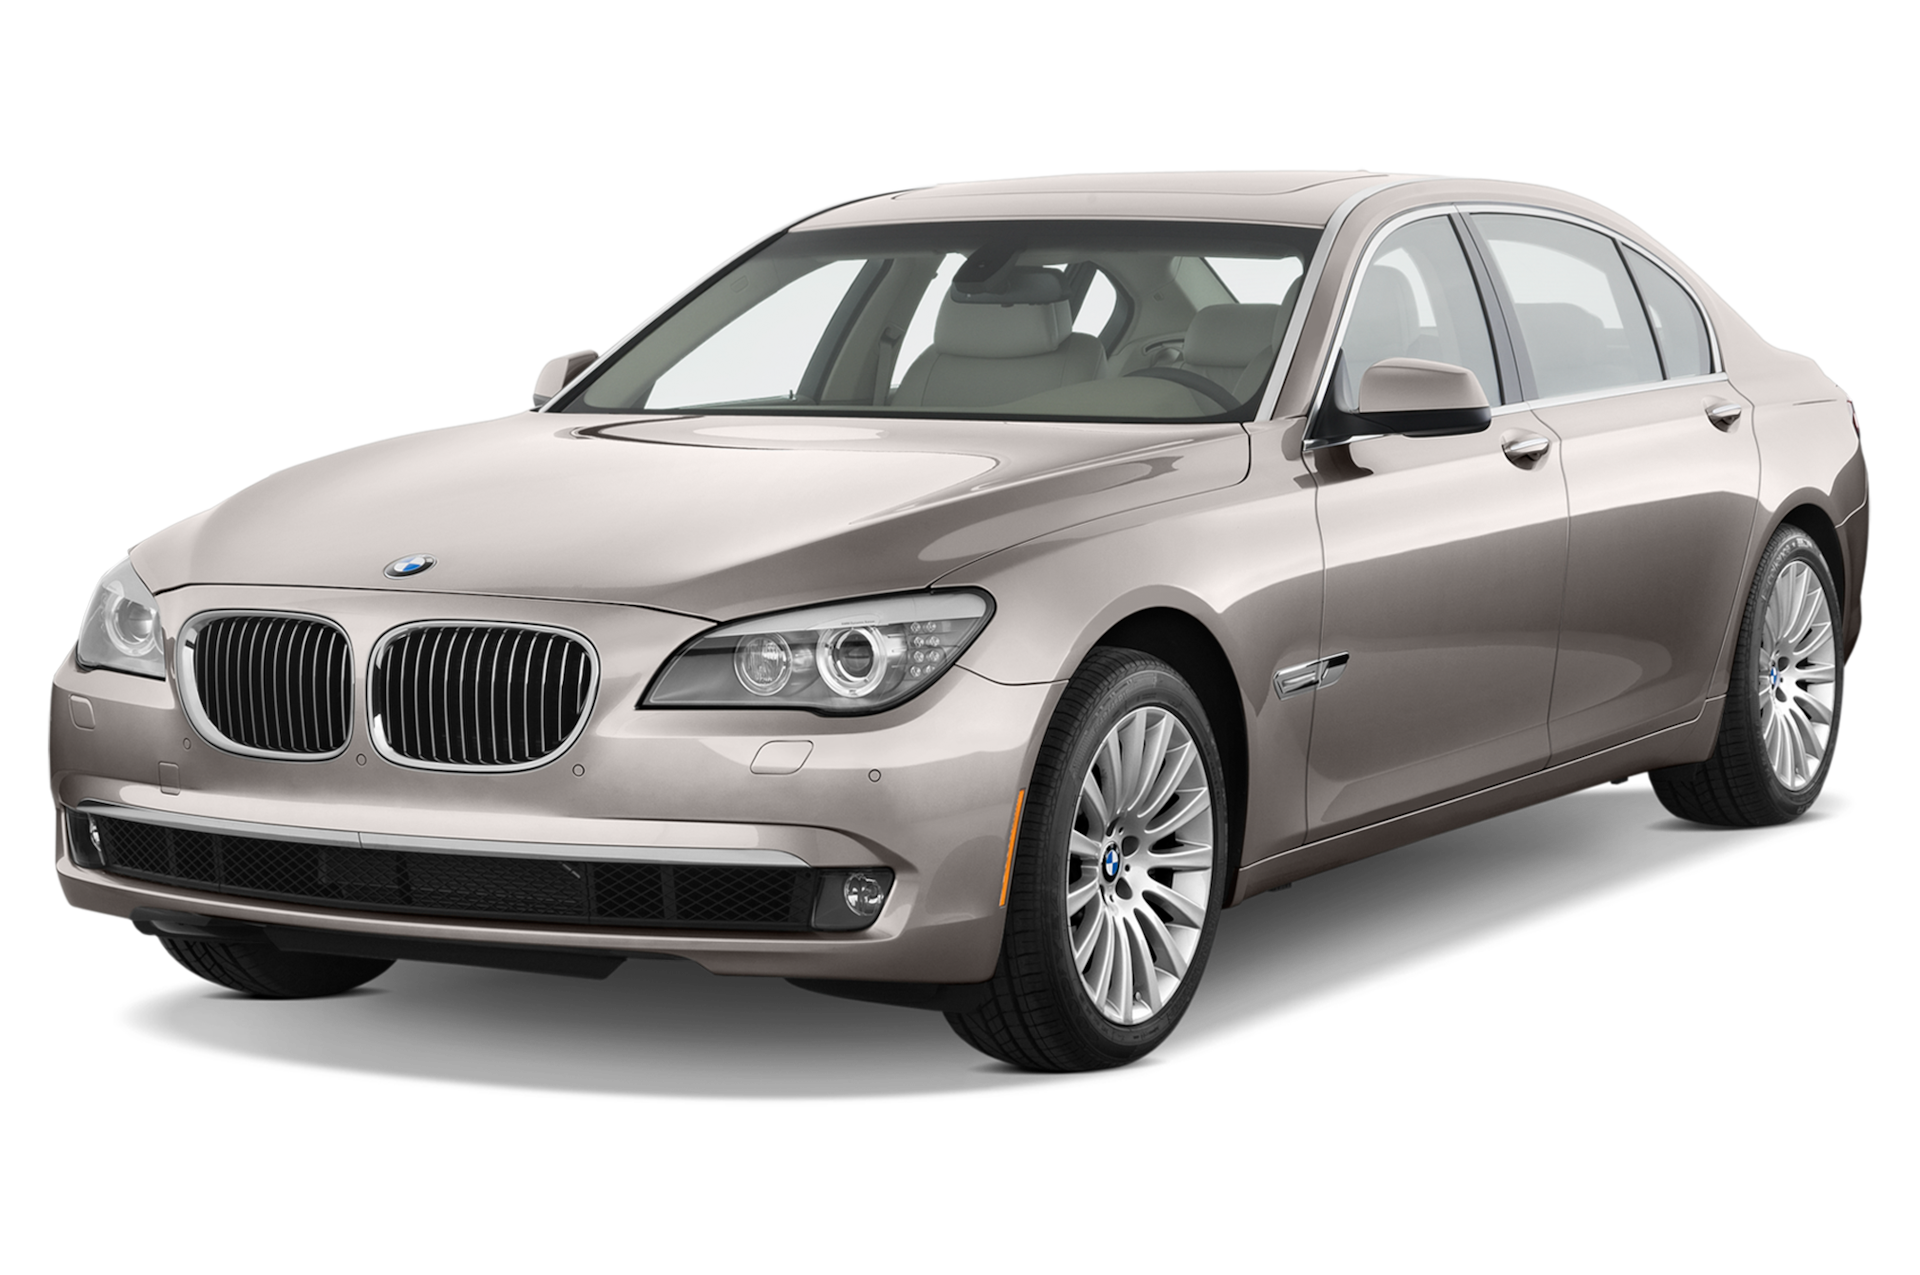 2012 BMW ActiveHybrid 7 Prices, Reviews, and Photos - MotorTrend